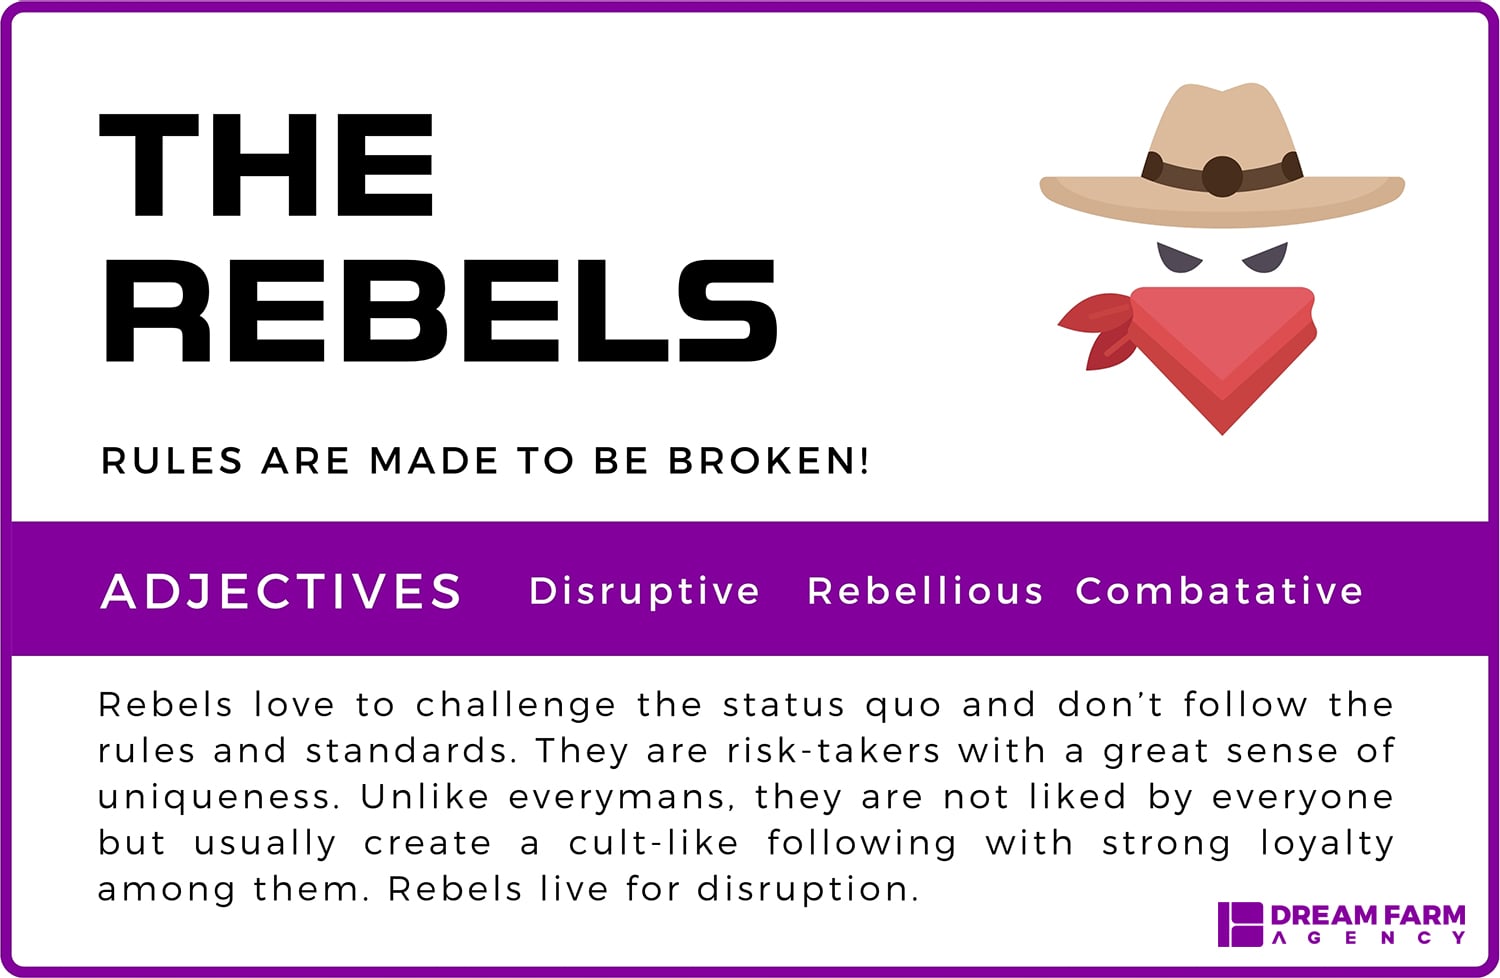 The Rebel (or Outlaw)